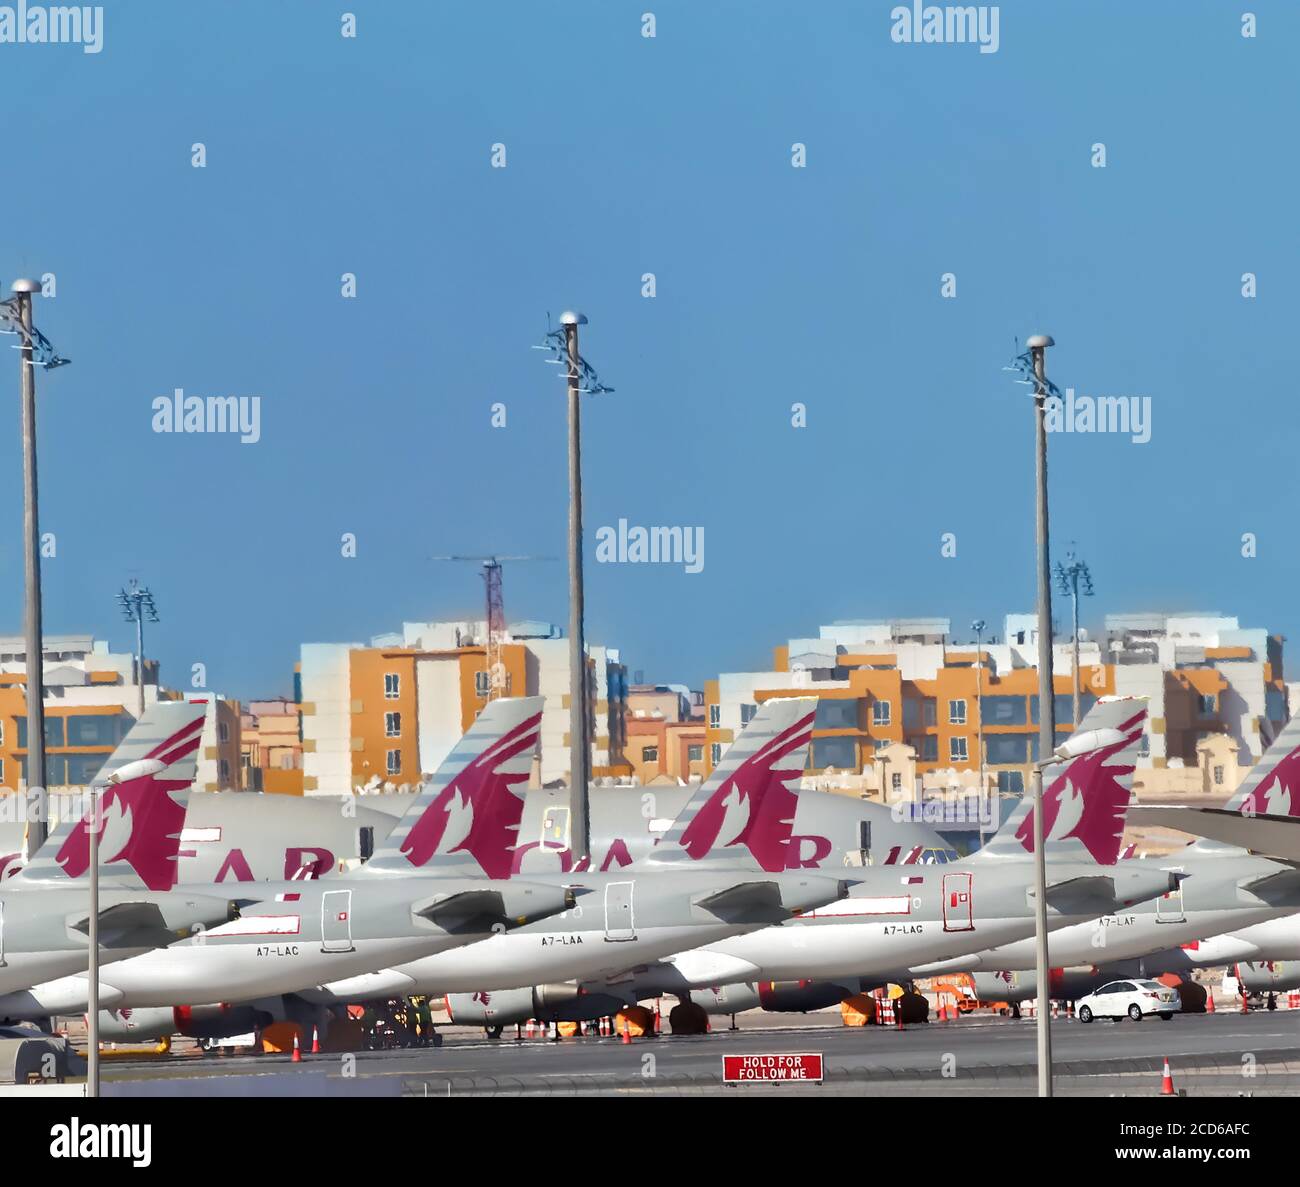 Qatar Airways is one of the leading airlines in the world with flying over 180 destinations all over the world. Stock Photo